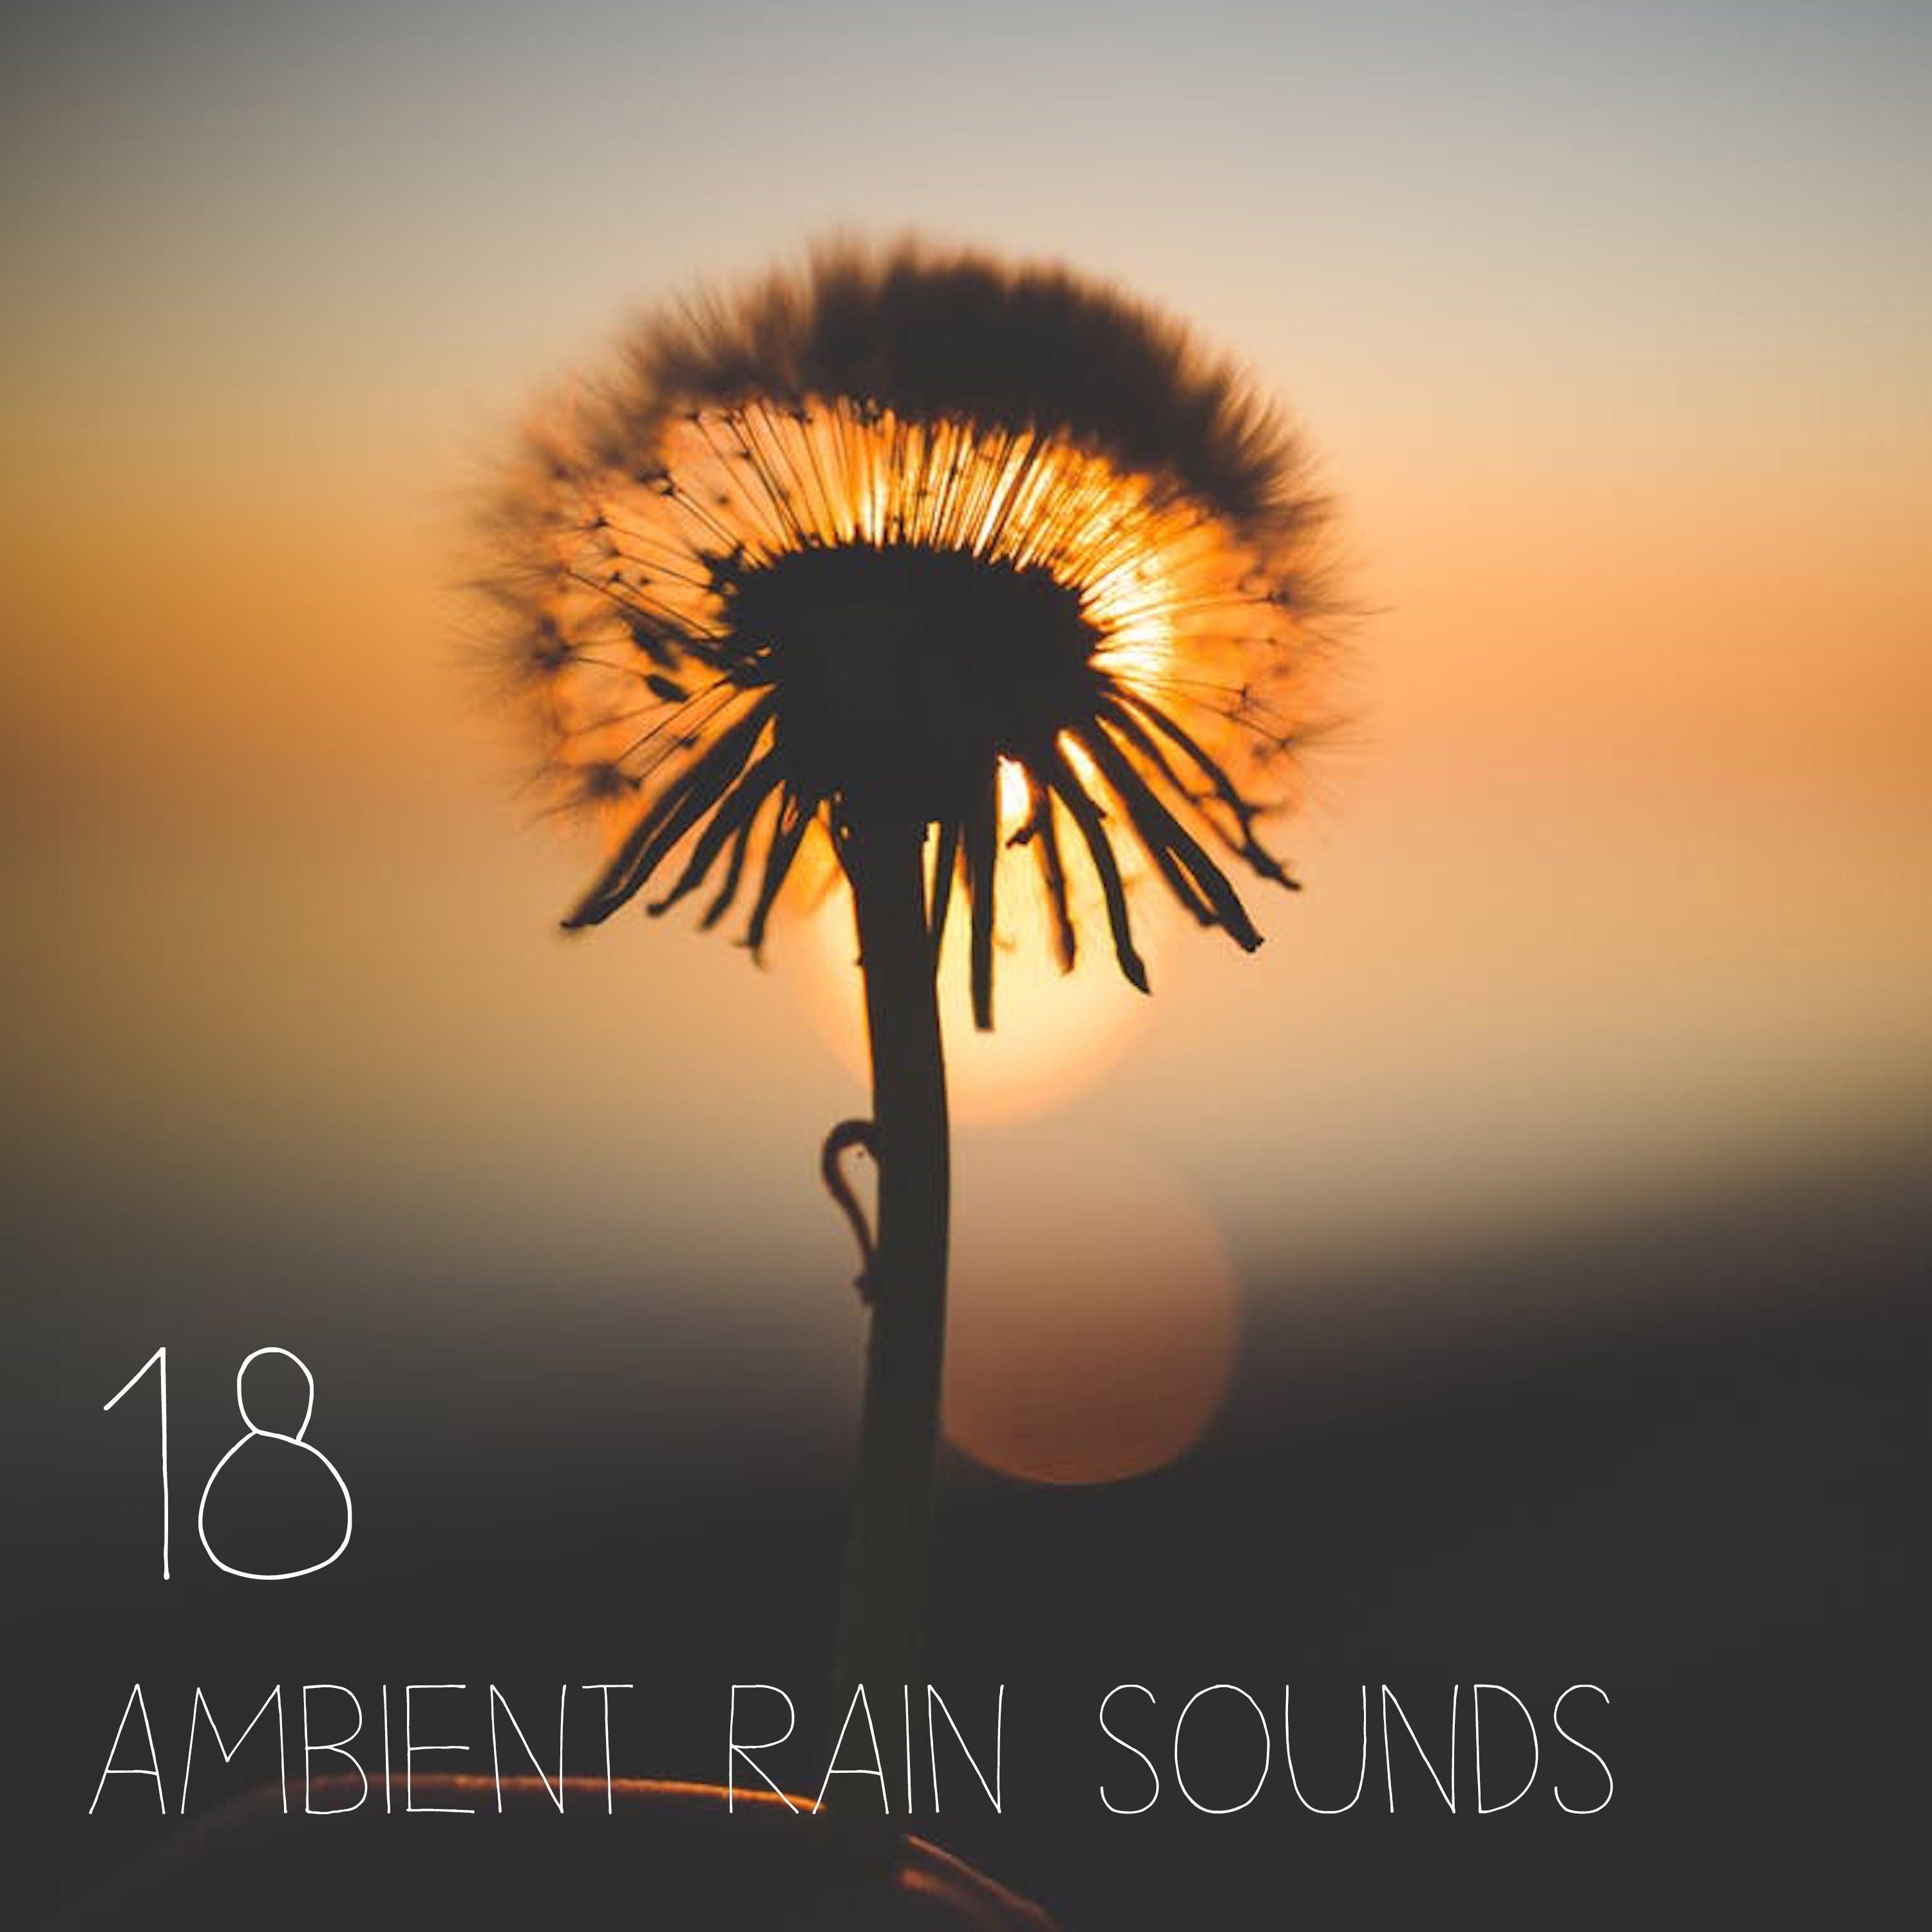 18 Ambient Rain Sounds and Sounds of Water - Deep Meditation and Sleep Sounds